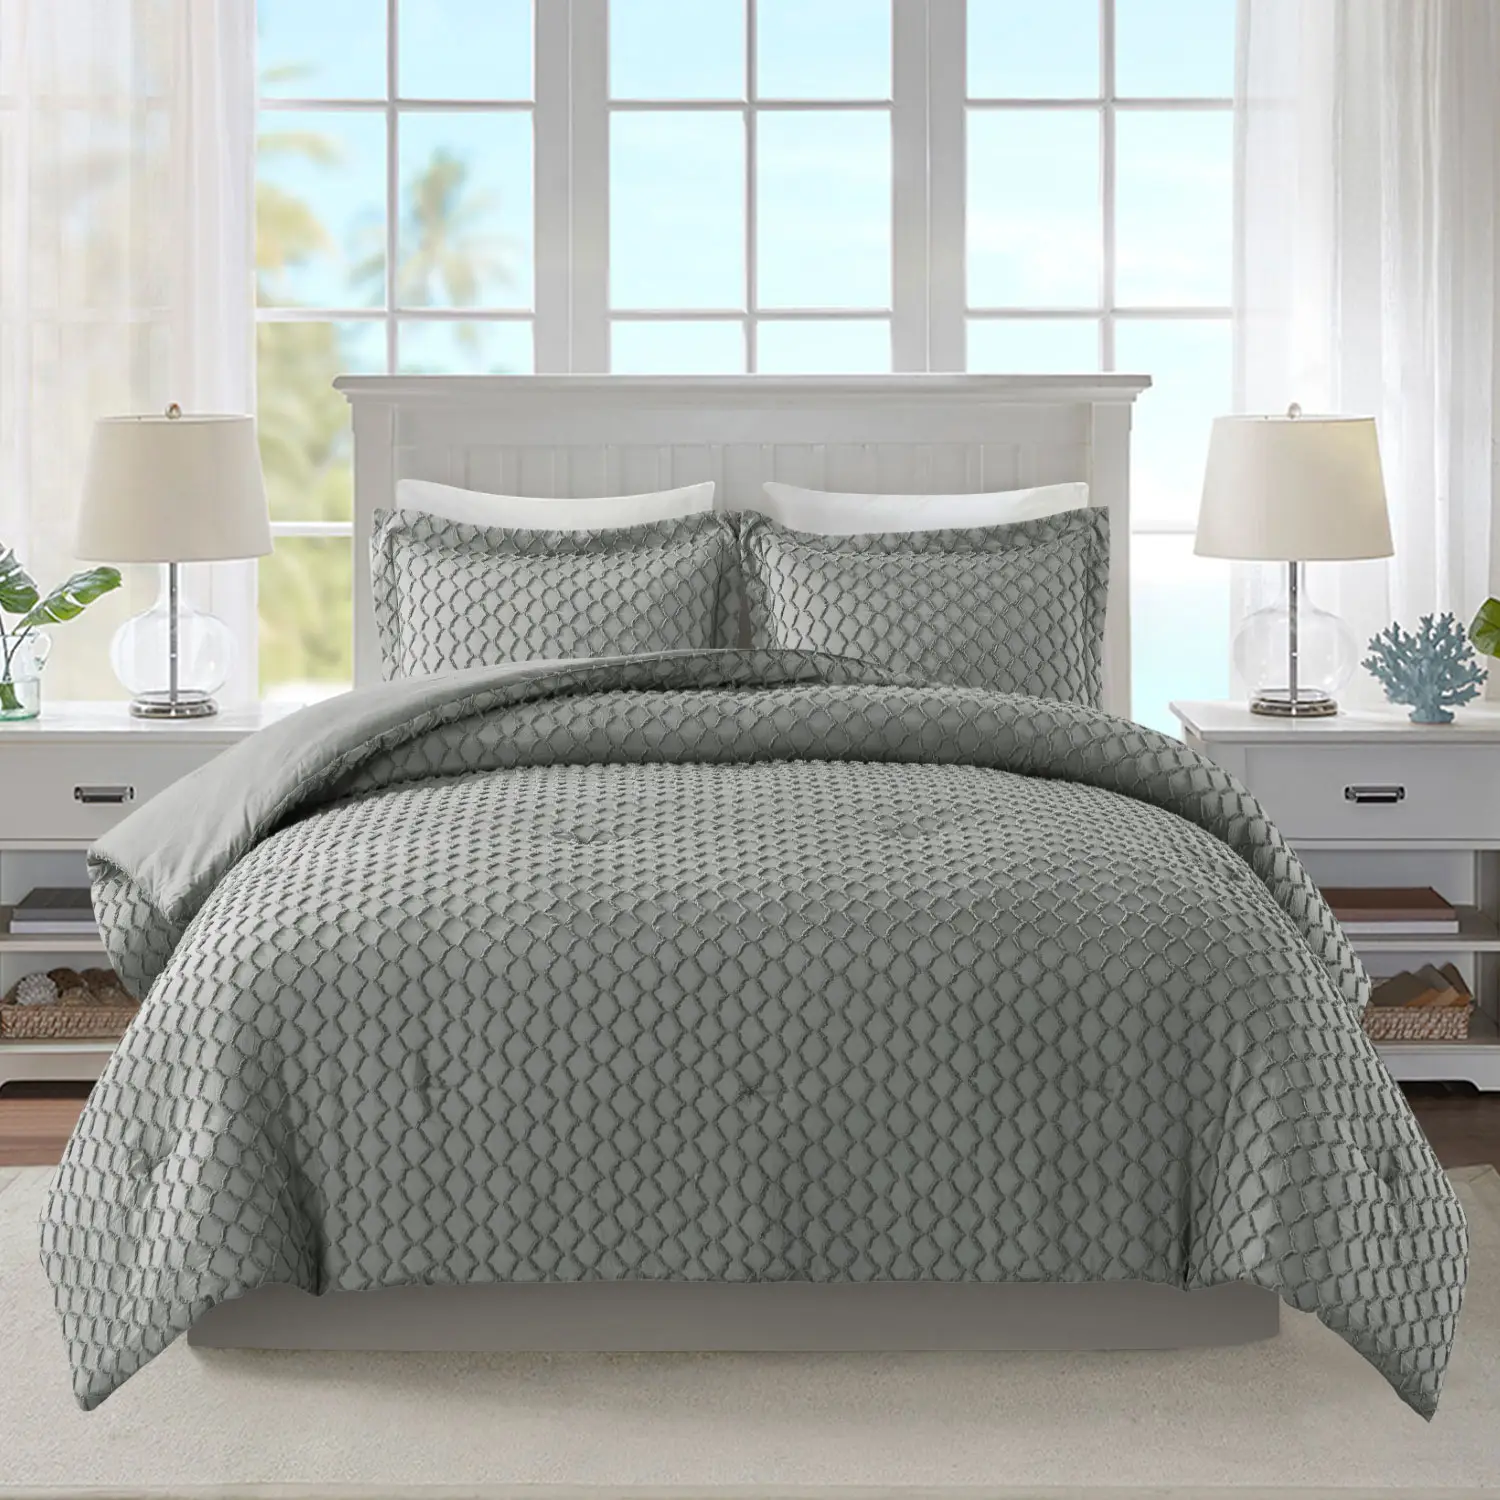 JML Bed In A Bag Jacquard Comforter Set With Tufted Diamond Pillowcases